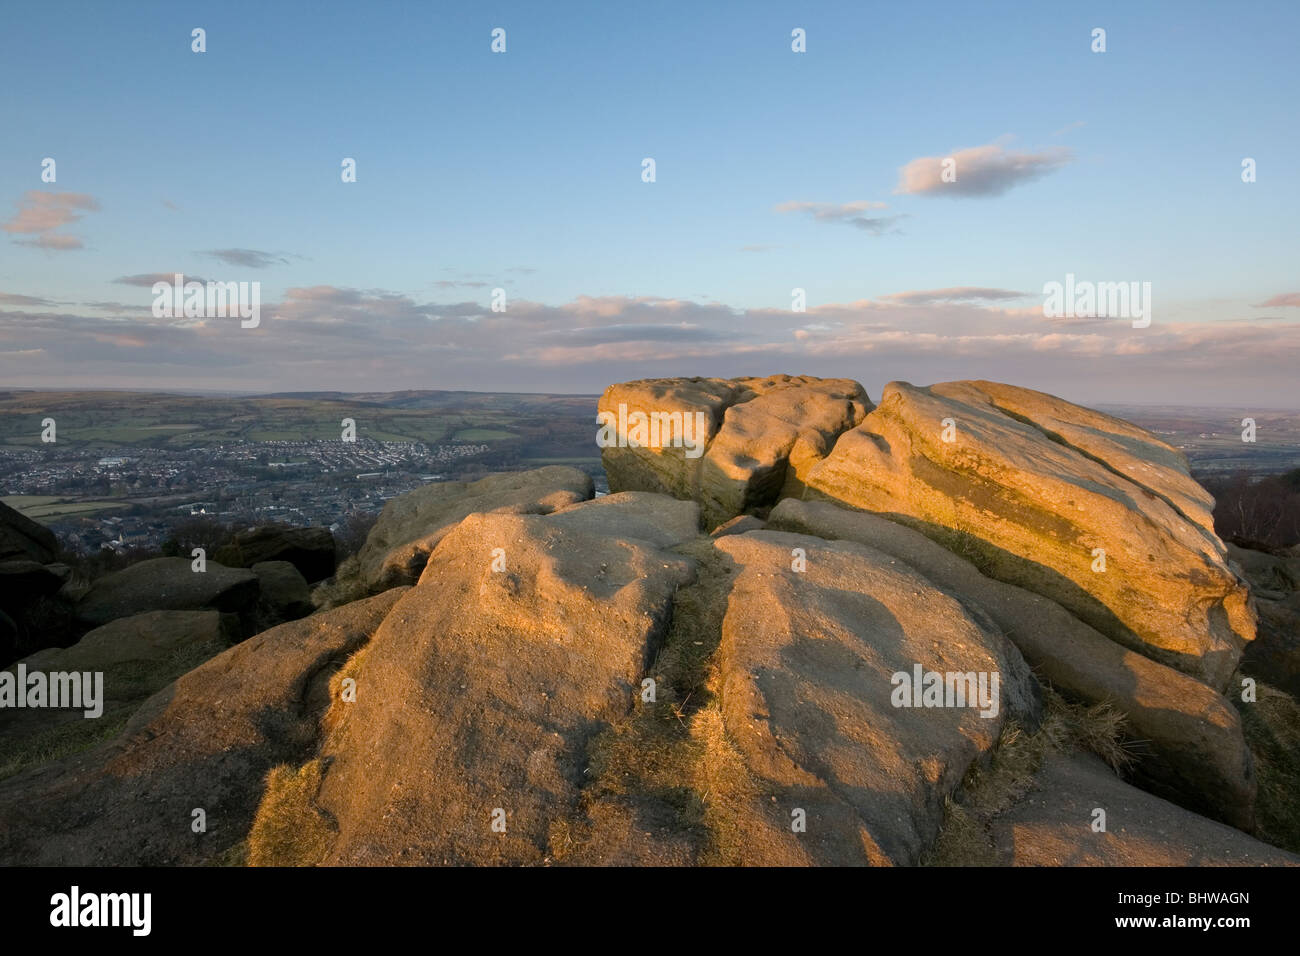 Millstone grit rocks at Surprise View on Otley Chevin, moors in West Yorkshire Stock Photo